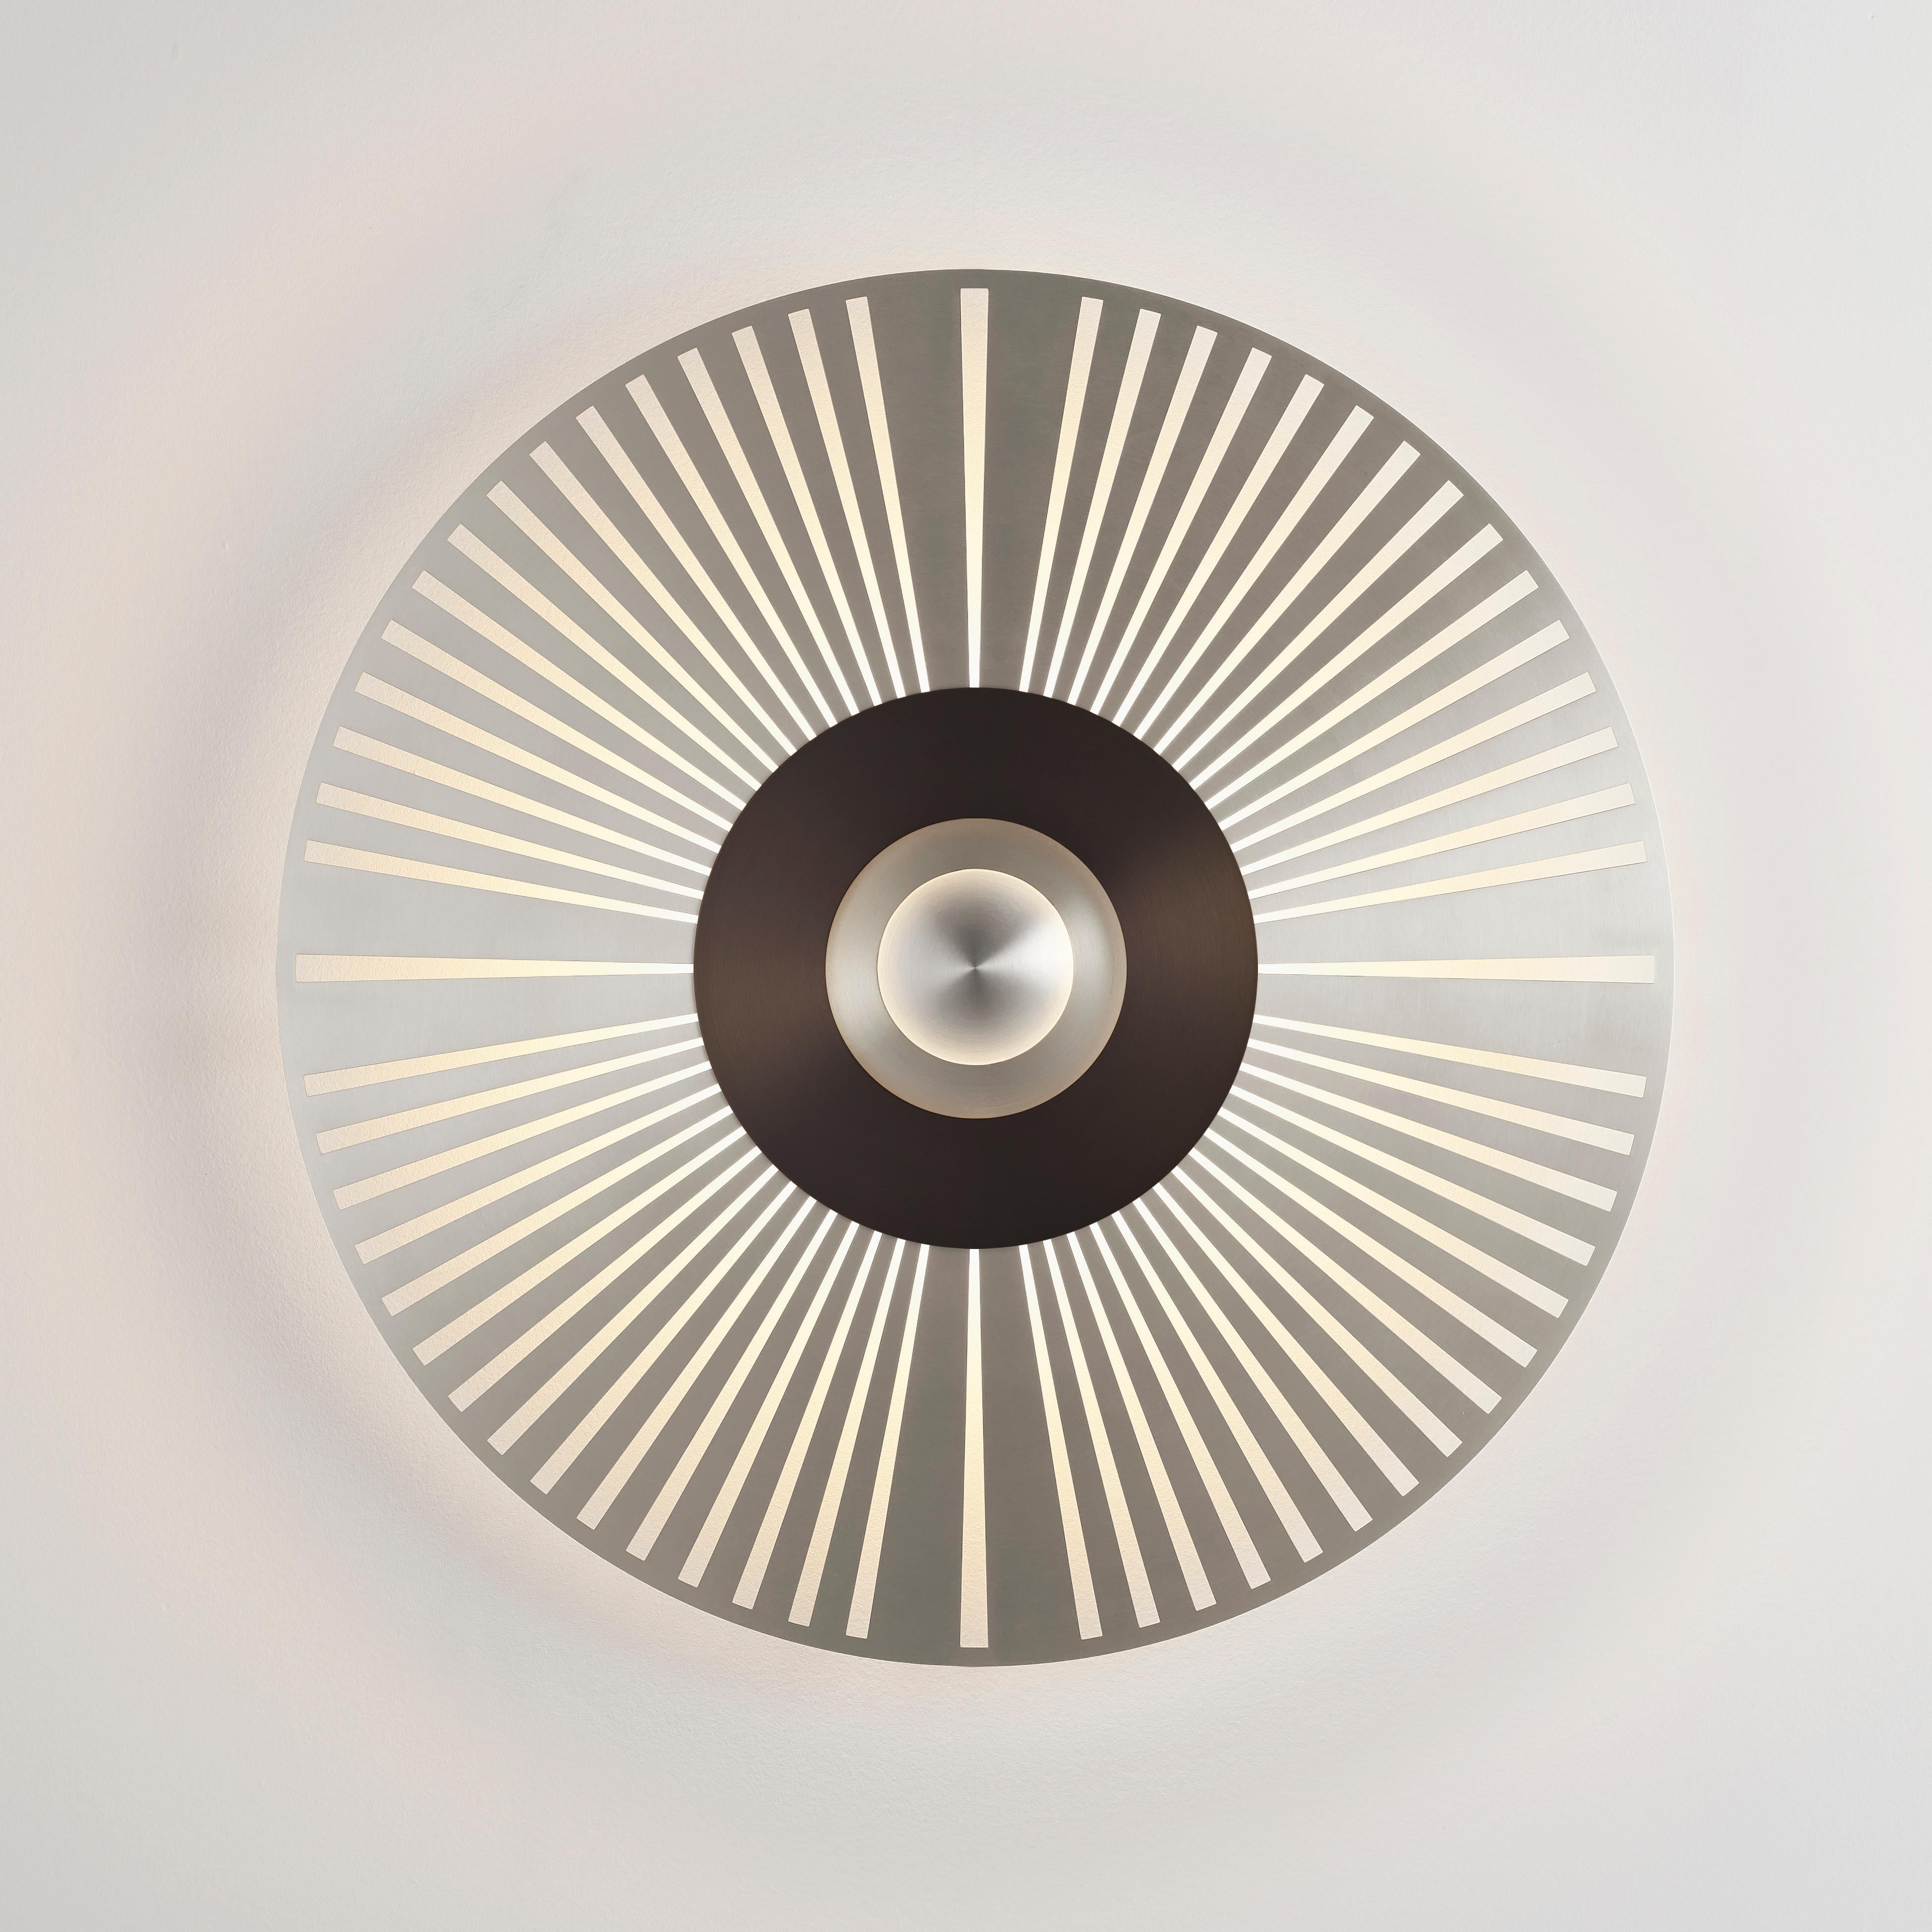 Atmos Eclat wall light by Emilie Cathelineau
Dimensions: D80 cm
Materials: solid brass, Polycarbonate diffuser.
Others finishes and dimensions are available.

All our lamps can be wired according to each country. If sold to the USA it will be